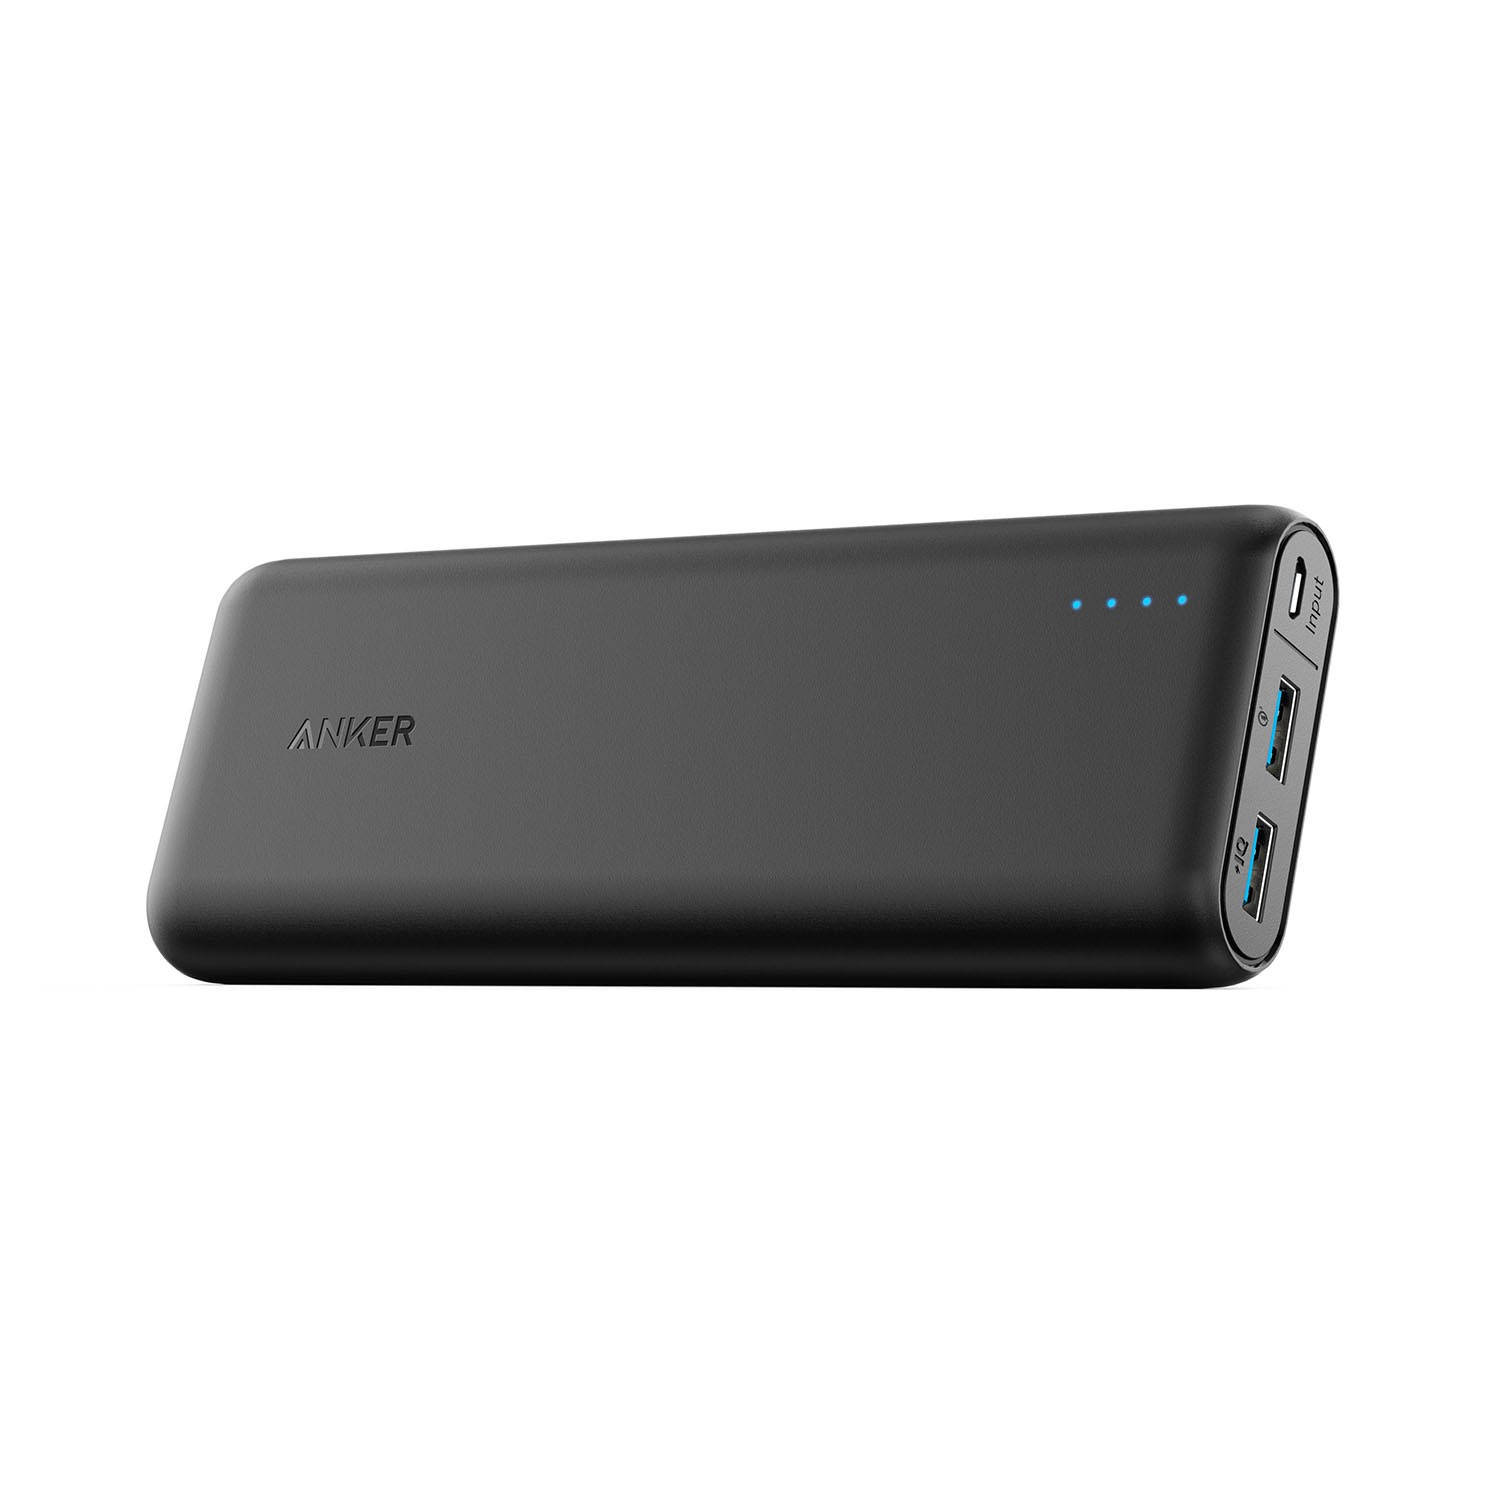 Batería Portatil Anker PowerCore Speed 20000 Quick Charge 3.0